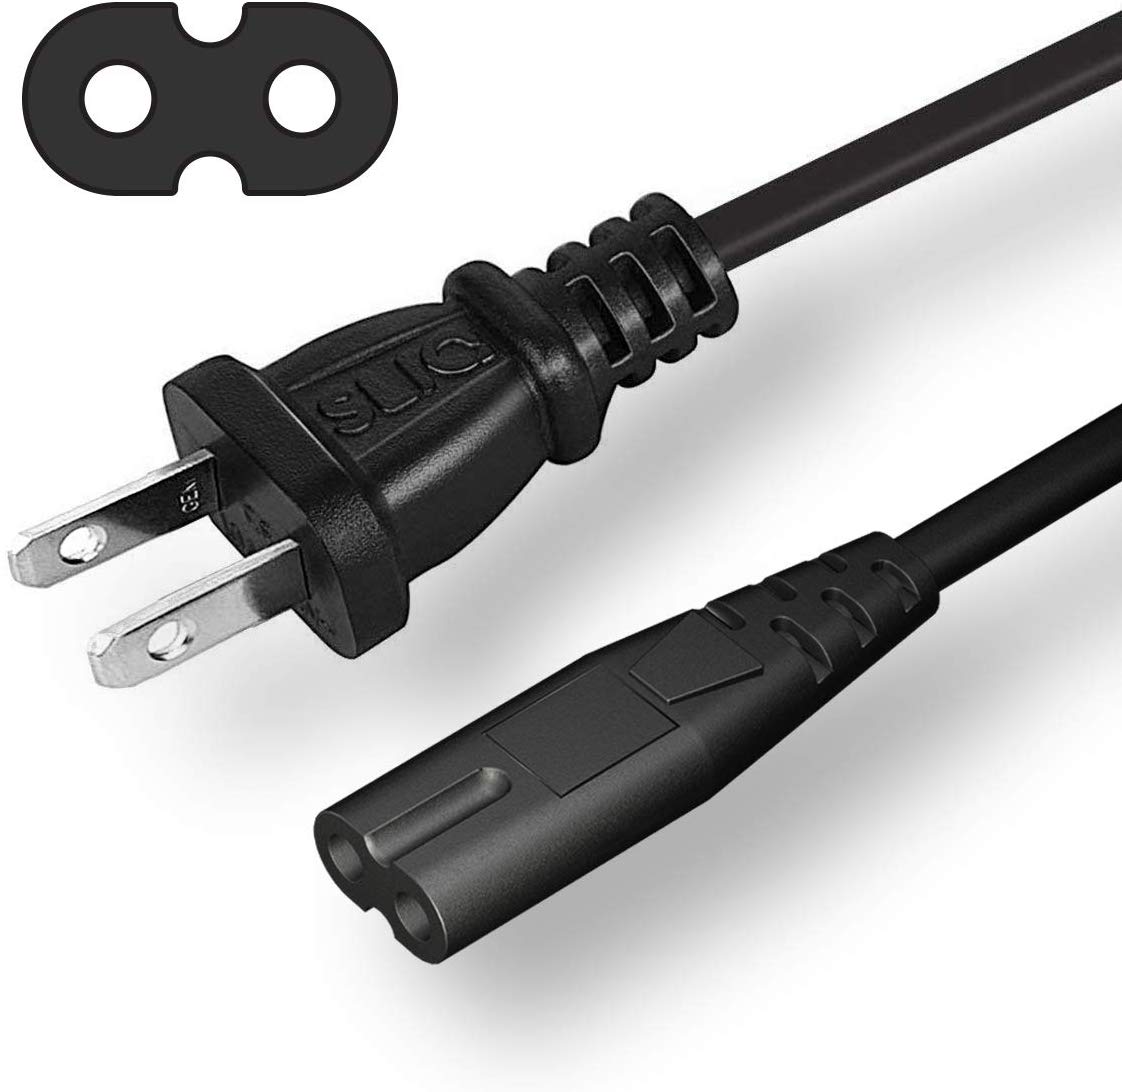 Sliq Gaming Power Cable - for Xbox One S, Xbox One X, Playstation 3 & 4 Slim (6 Feet - Figure 8, Black)